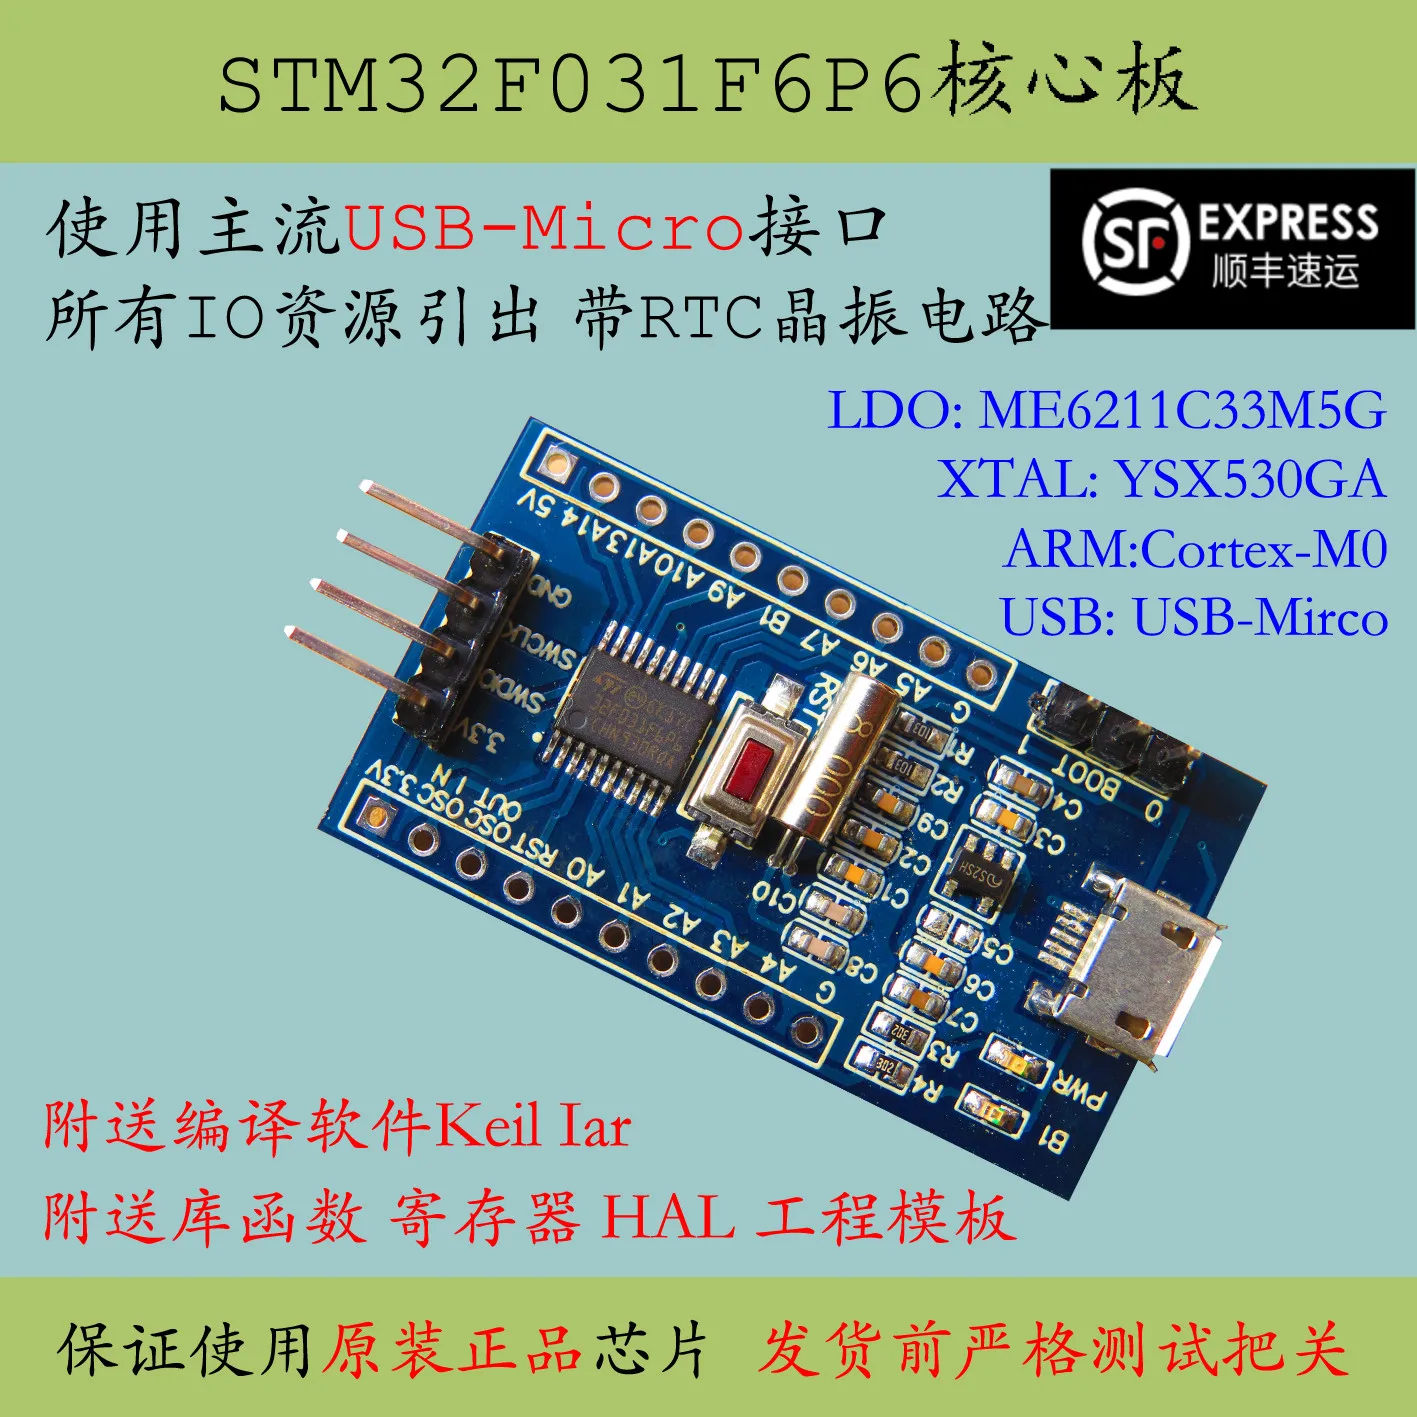 

Stm32f031f6p6 Minimum System F031 Core Board STM32 Promotion Development Board New Product Learning Evaluation Board